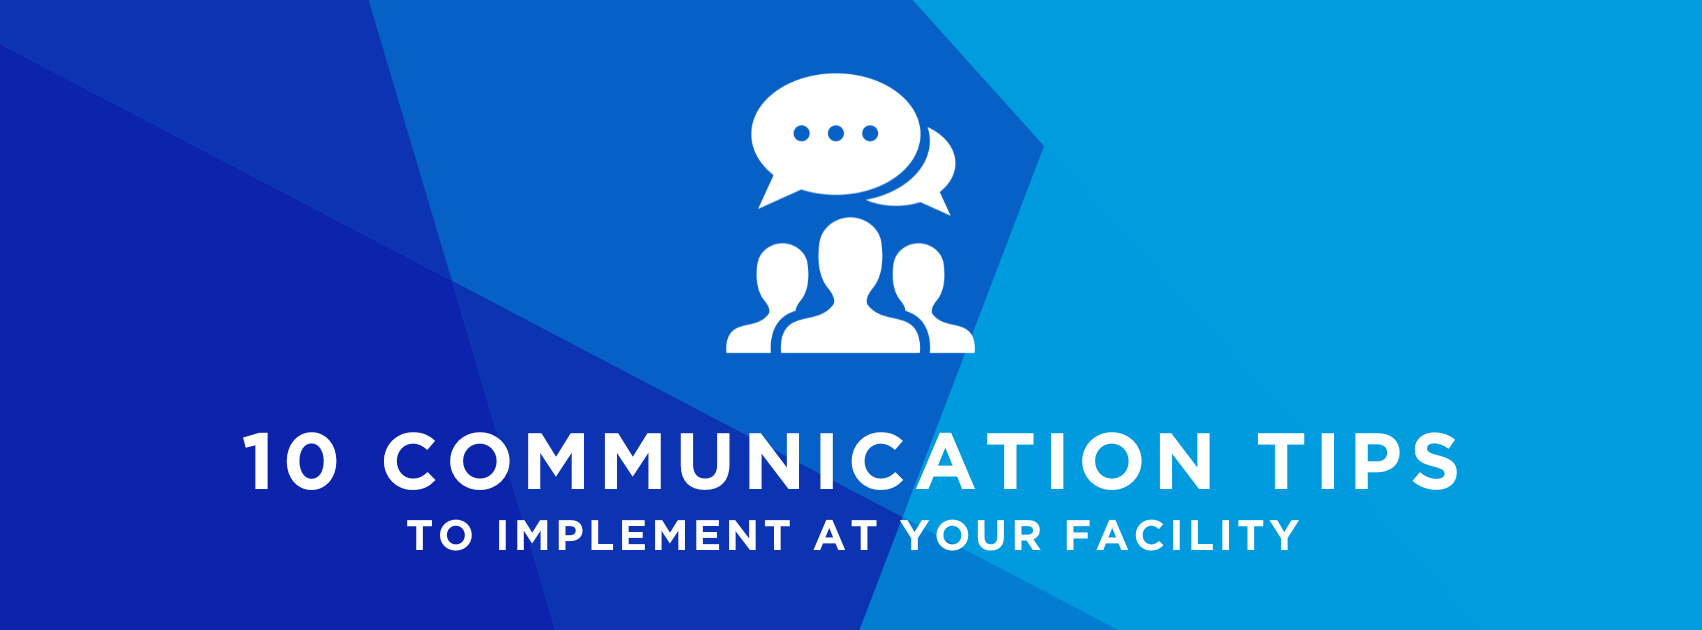 10 communication tips to implement at your facility